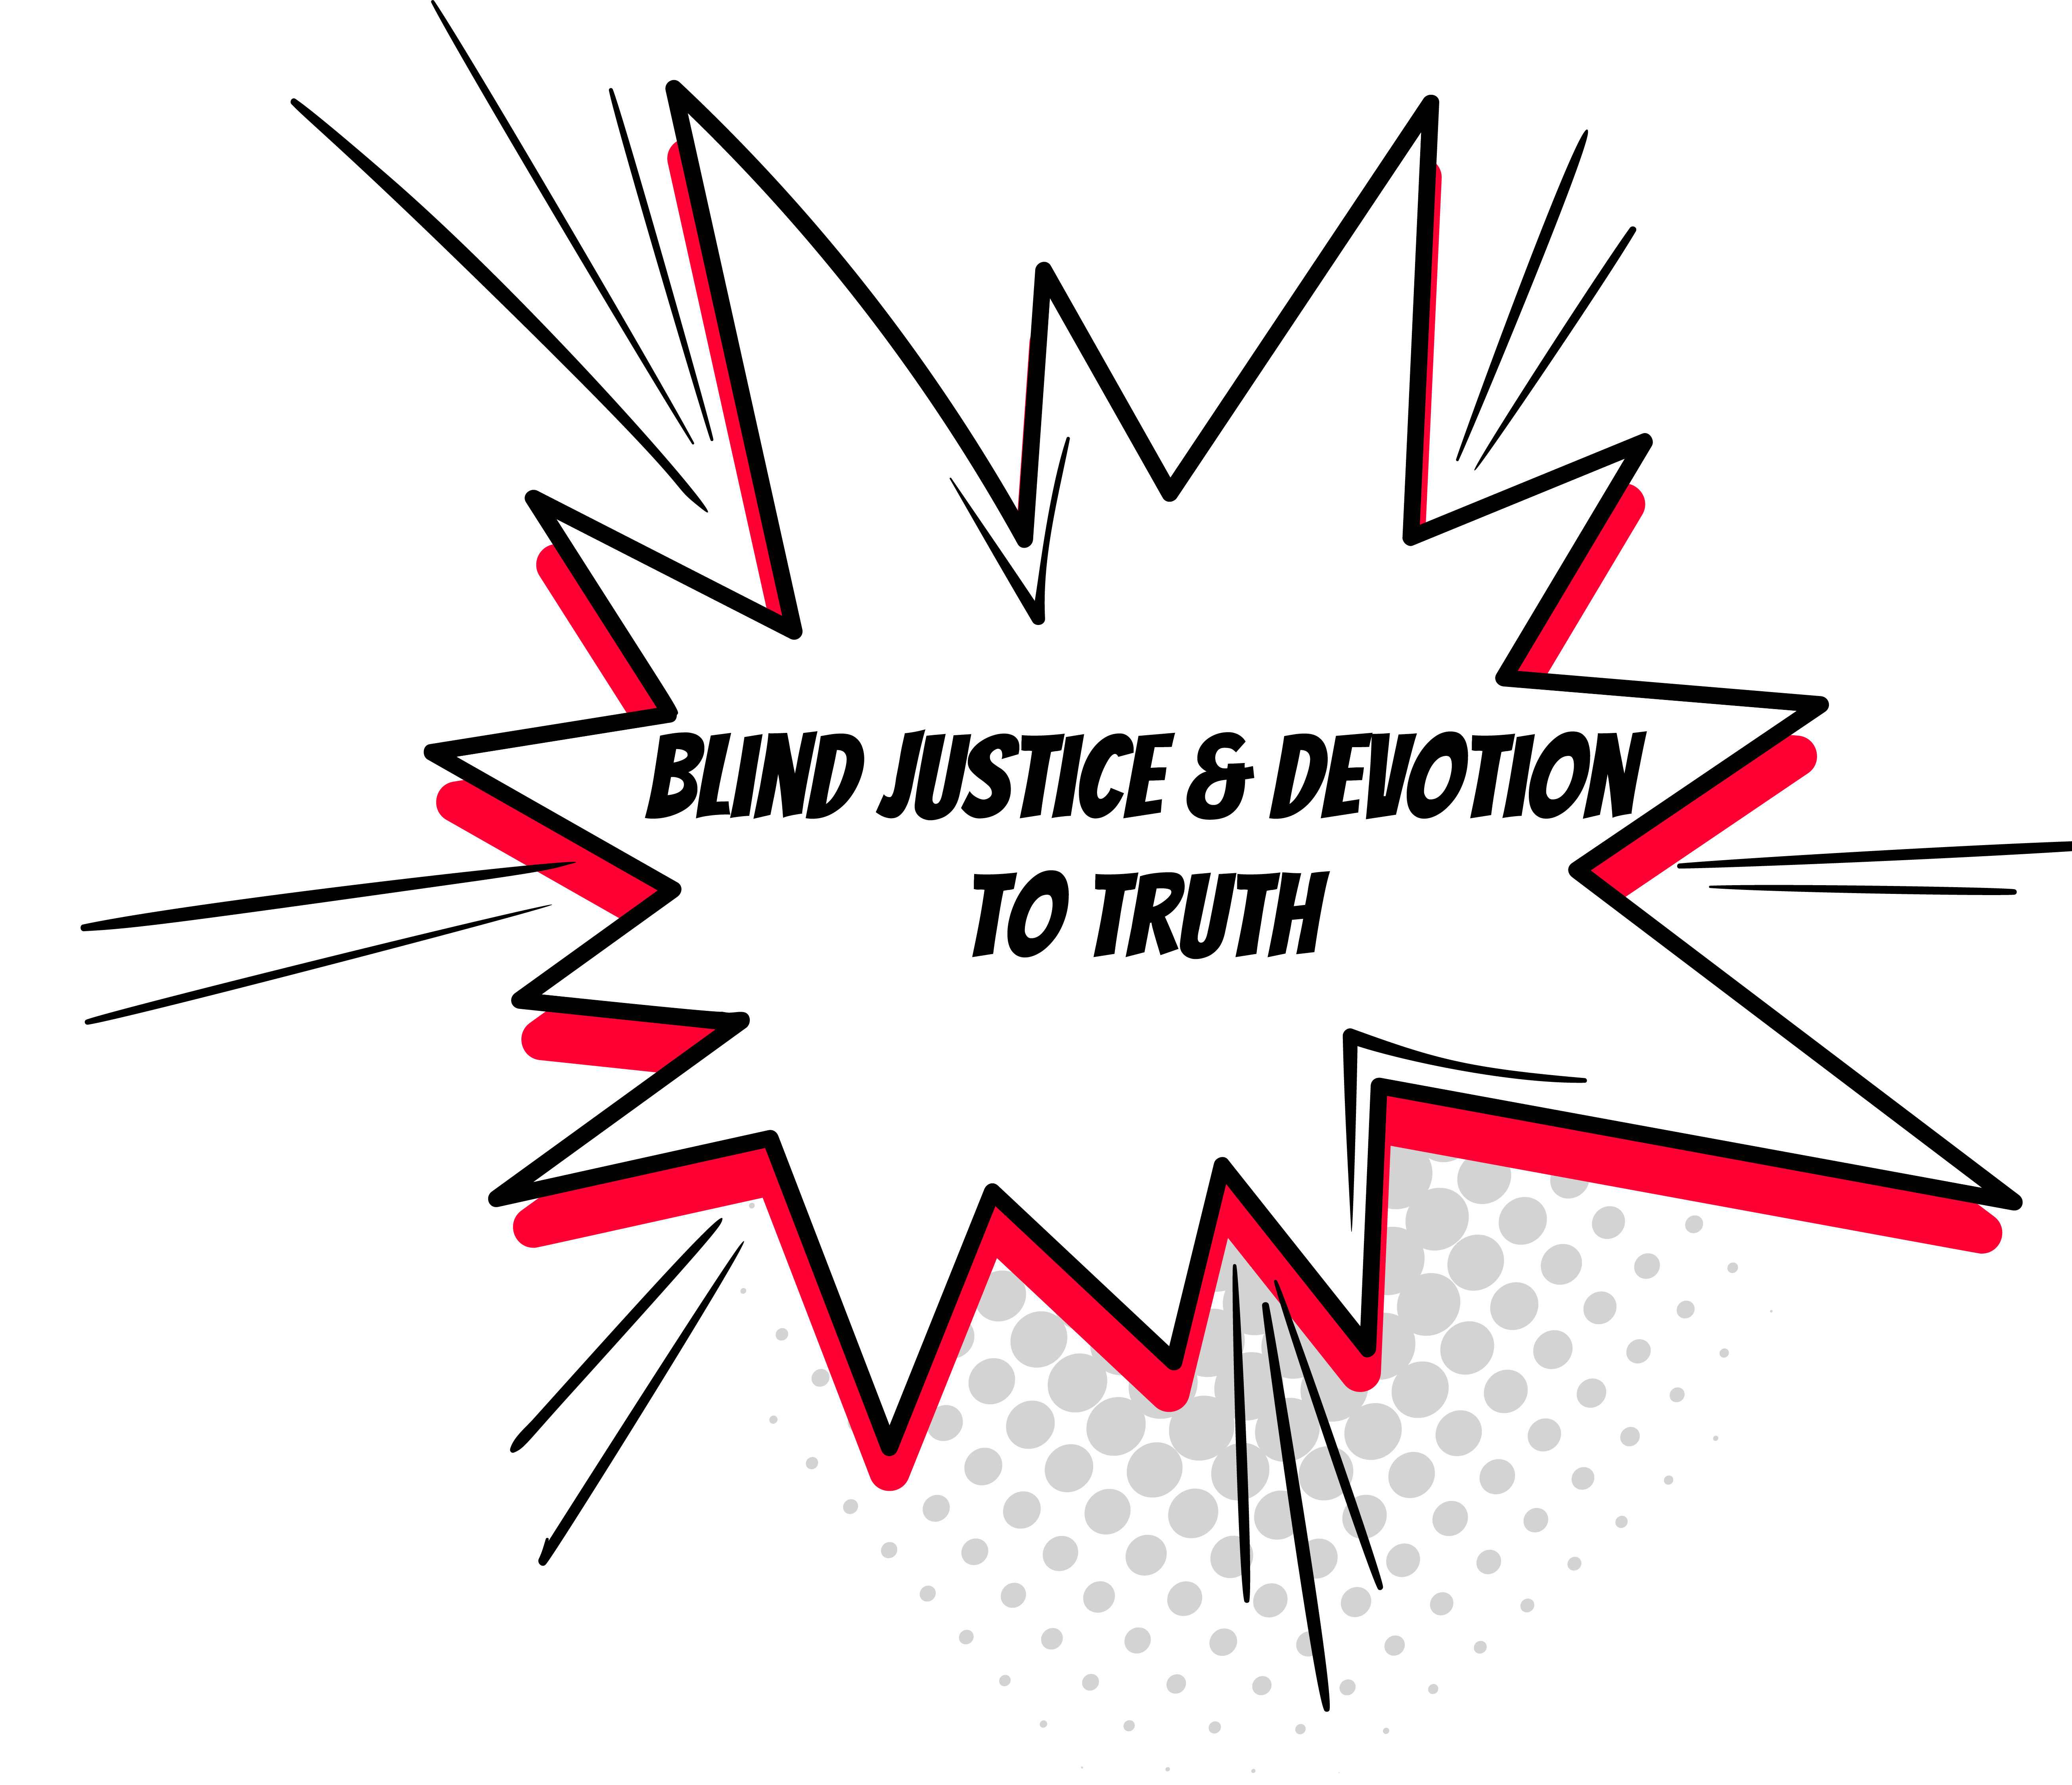 blind justice & devotion to truth